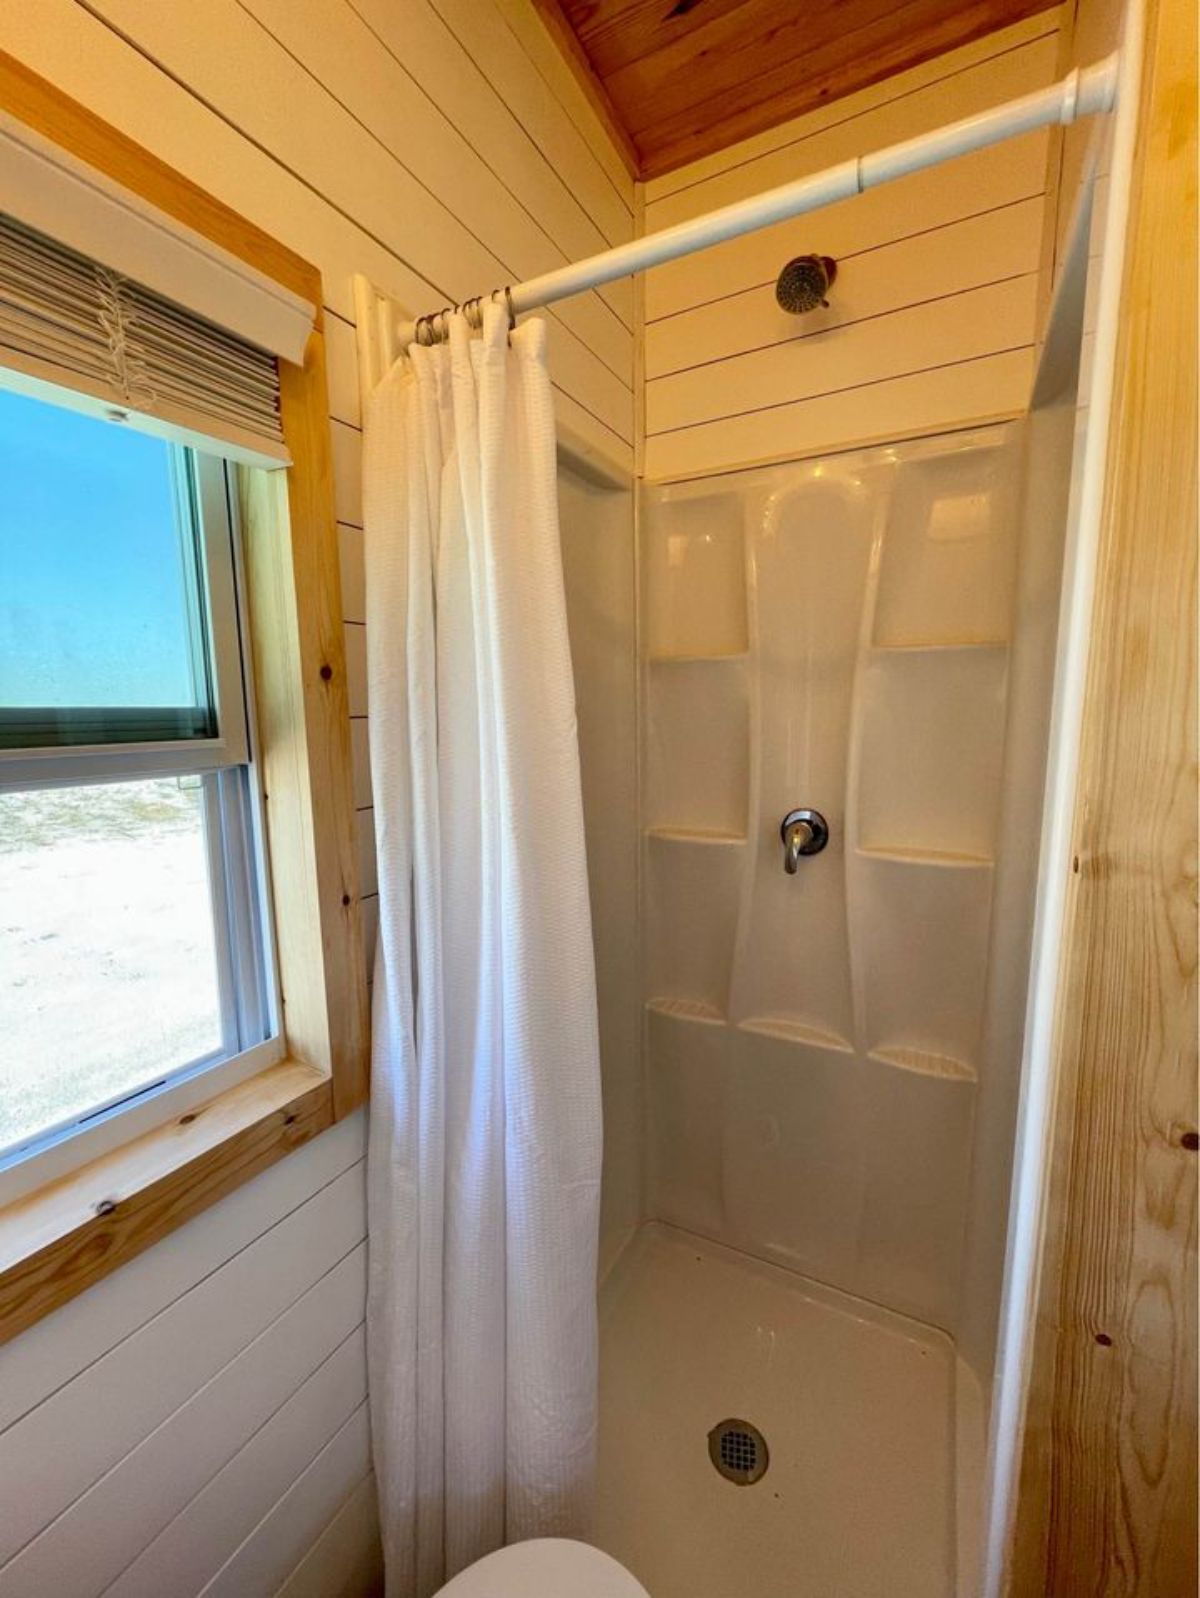 Shower area of 14' Tiny Camper on Wheels